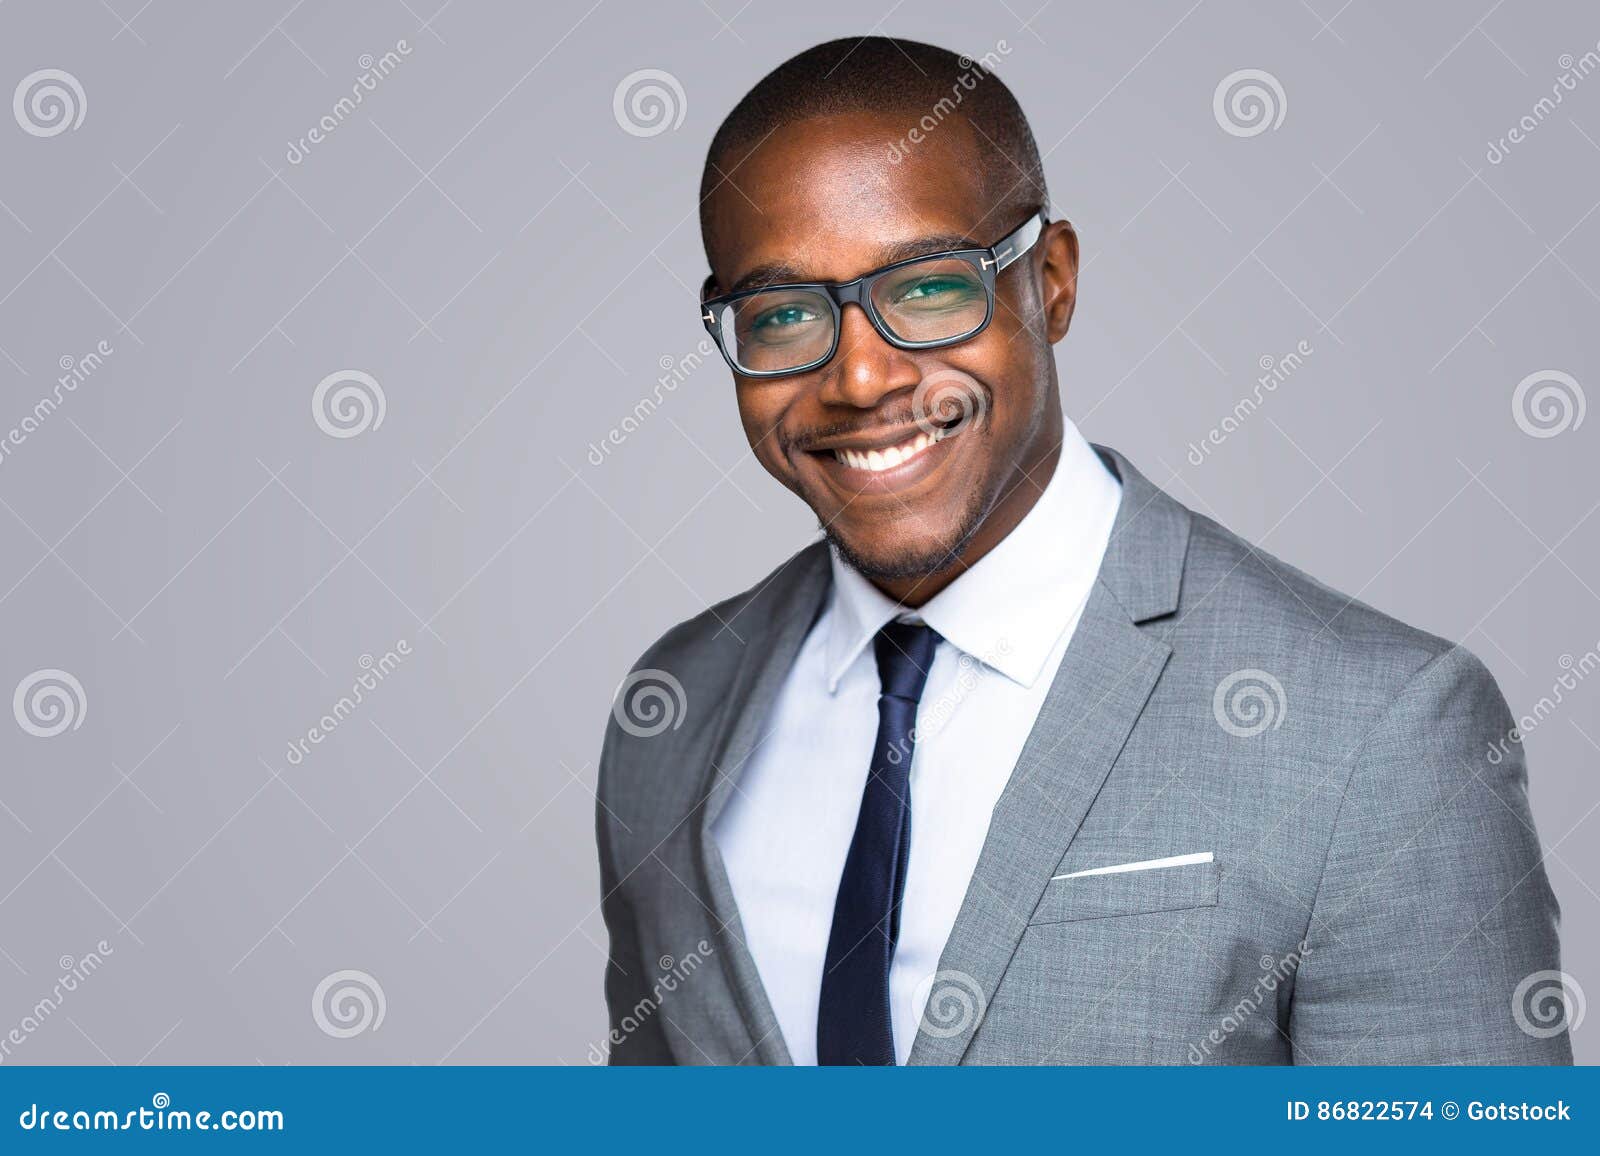 headshot of successful smiling cheerful african american businessman executive stylish company leader